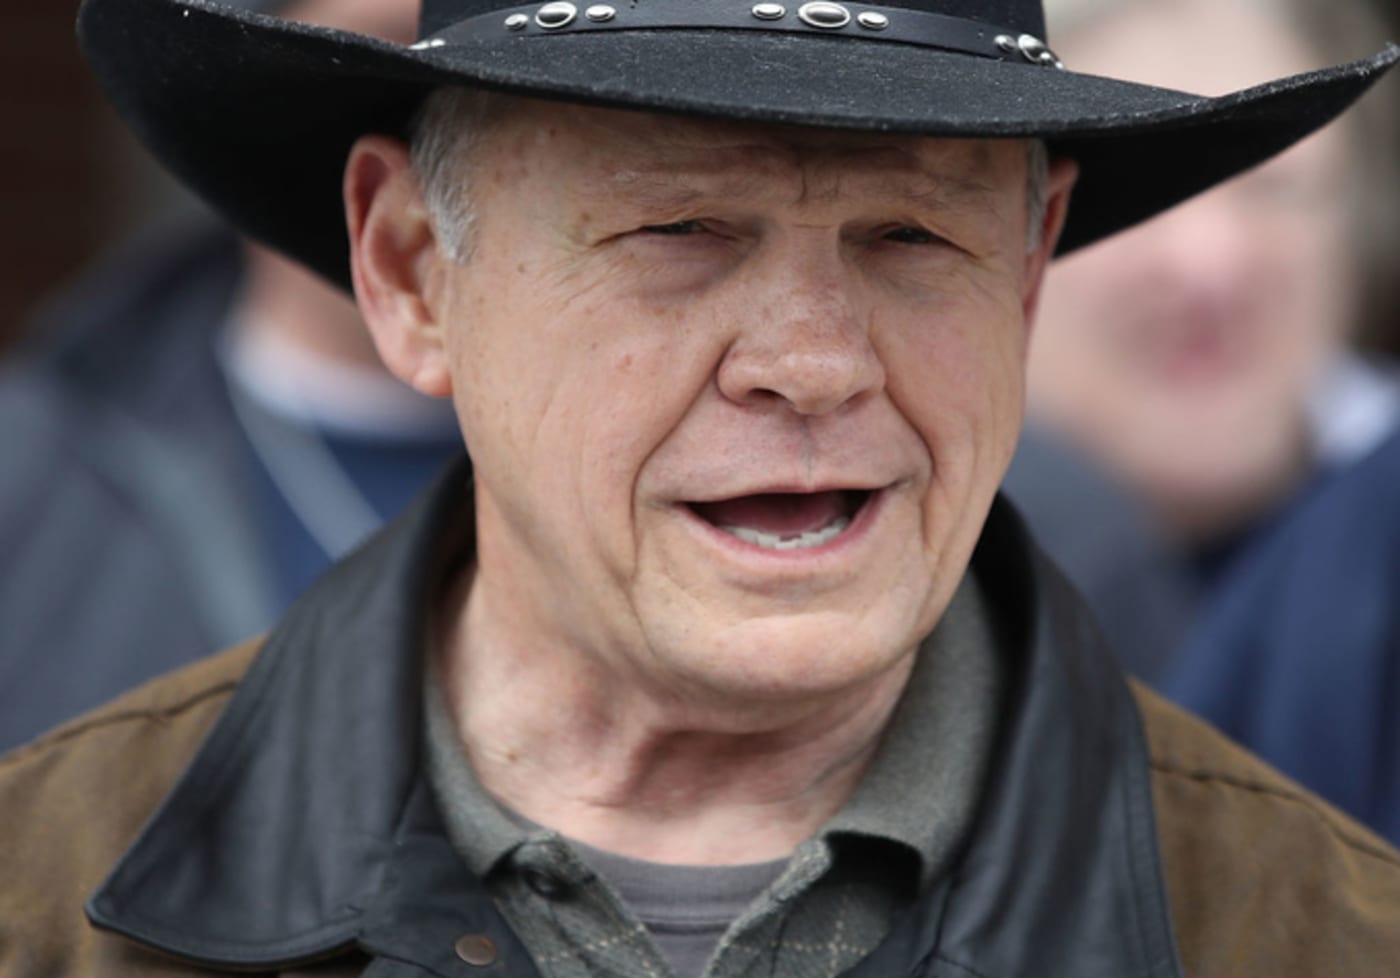 Republican Roy Moore at a polling location on December 12, 2017 in Gallant, Alabama